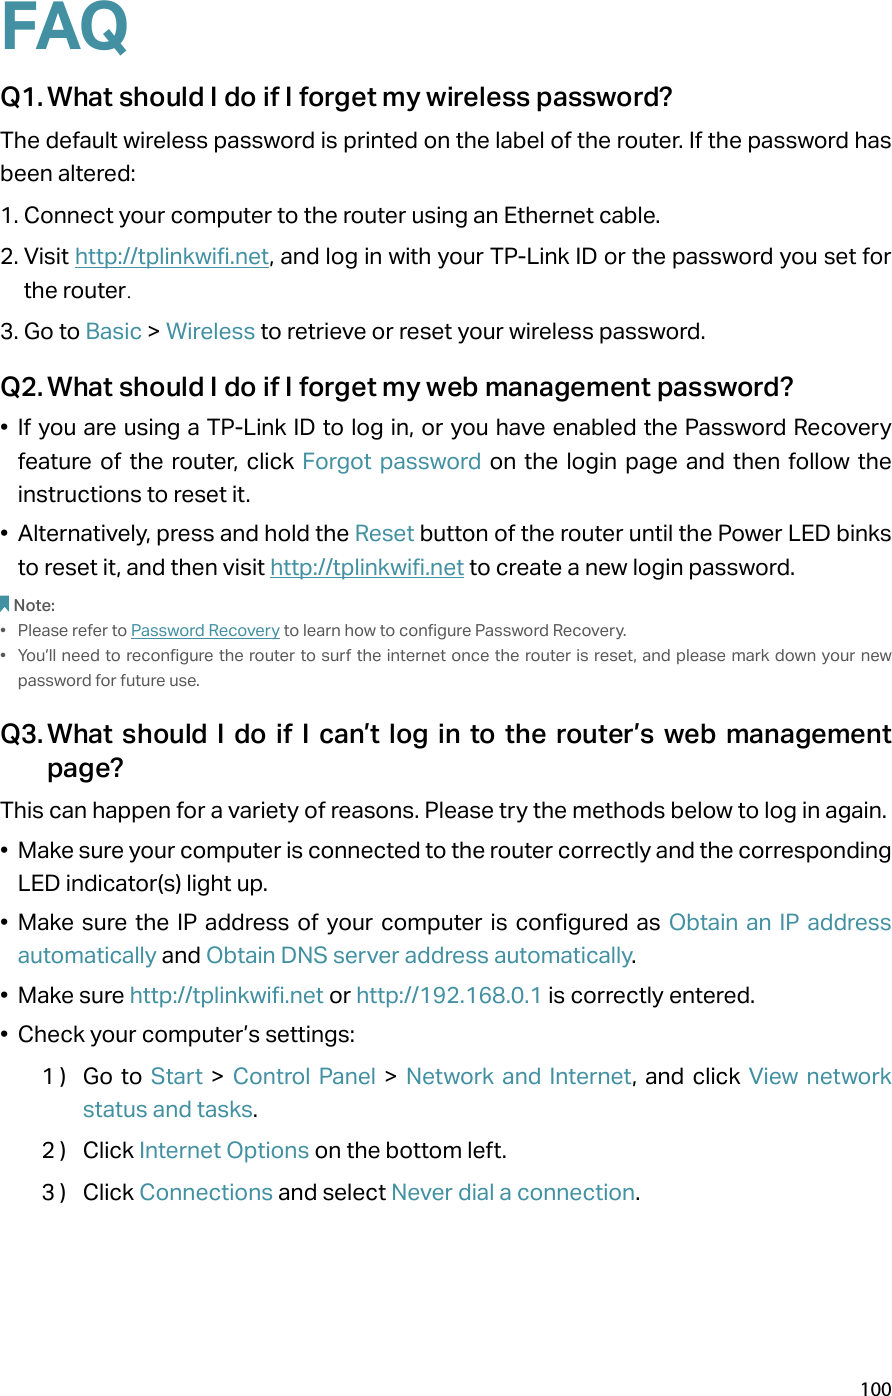 100FAQQ1. What should I do if I forget my wireless password?The default wireless password is printed on the label of the router. If the password has been altered:1. Connect your computer to the router using an Ethernet cable. 2. Visit http://tplinkwifi.net, and log in with your TP-Link ID or the password you set for the router.3. Go to Basic &gt; Wireless to retrieve or reset your wireless password.Q2. What should I do if I forget my web management password?•  If you are using a TP-Link ID to log in, or you have enabled the Password Recovery feature of the router, click Forgot password on the login page and then follow the instructions to reset it.•  Alternatively, press and hold the Reset button of the router until the Power LED binks to reset it, and then visit http://tplinkwifi.net to create a new login password.Note: •  Please refer to Password Recovery to learn how to configure Password Recovery.•  You’ll need to reconfigure the router to surf the internet once the router is reset, and please mark down your new password for future use.Q3. What should I do if I can’t log in to the router’s web management page?This can happen for a variety of reasons. Please try the methods below to log in again.•  Make sure your computer is connected to the router correctly and the corresponding LED indicator(s) light up.•  Make sure the IP address of your computer is configured as Obtain an IP address automatically and Obtain DNS server address automatically.•  Make sure http://tplinkwifi.net or http://192.168.0.1 is correctly entered.•  Check your computer’s settings:1 )  Go to Start &gt; Control Panel &gt; Network and Internet, and click View network status and tasks.2 )  Click Internet Options on the bottom left.3 )  Click Connections and select Never dial a connection.